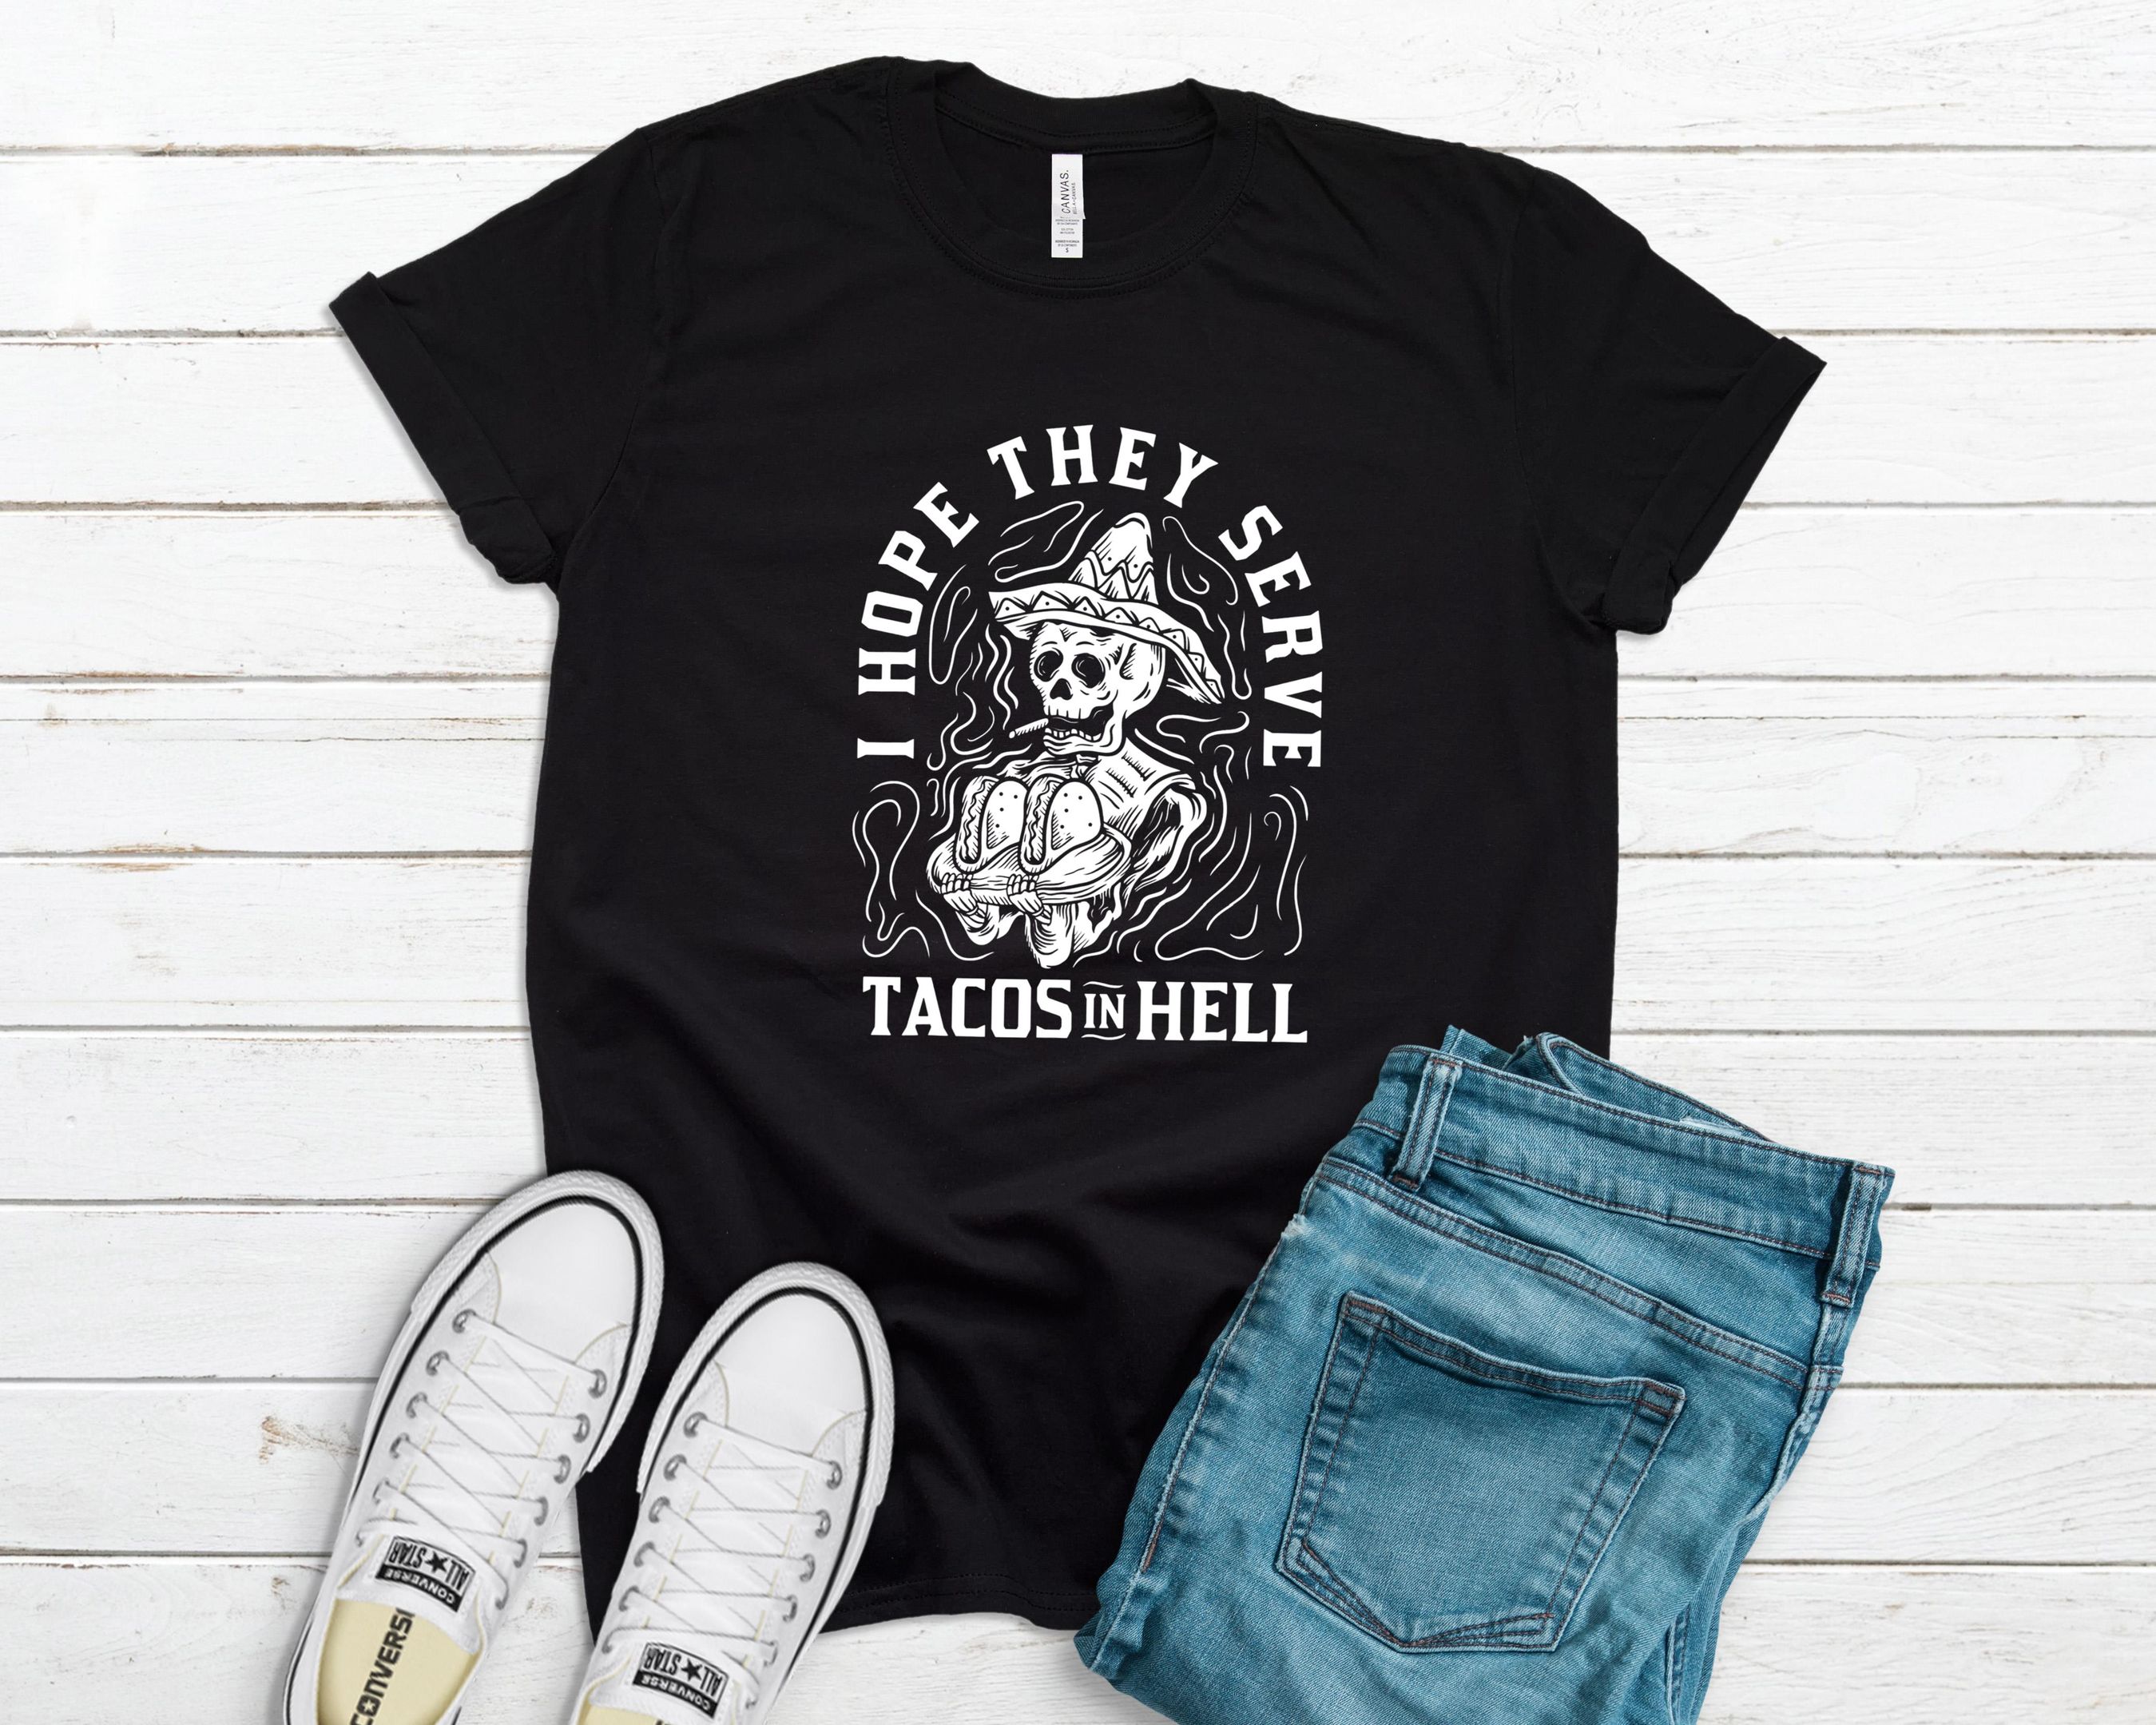 I Hope They Serve Tacos In Hell Shirt, Tacos Shirt, Funny Halloween Shirt, Happy Halloween Shirt